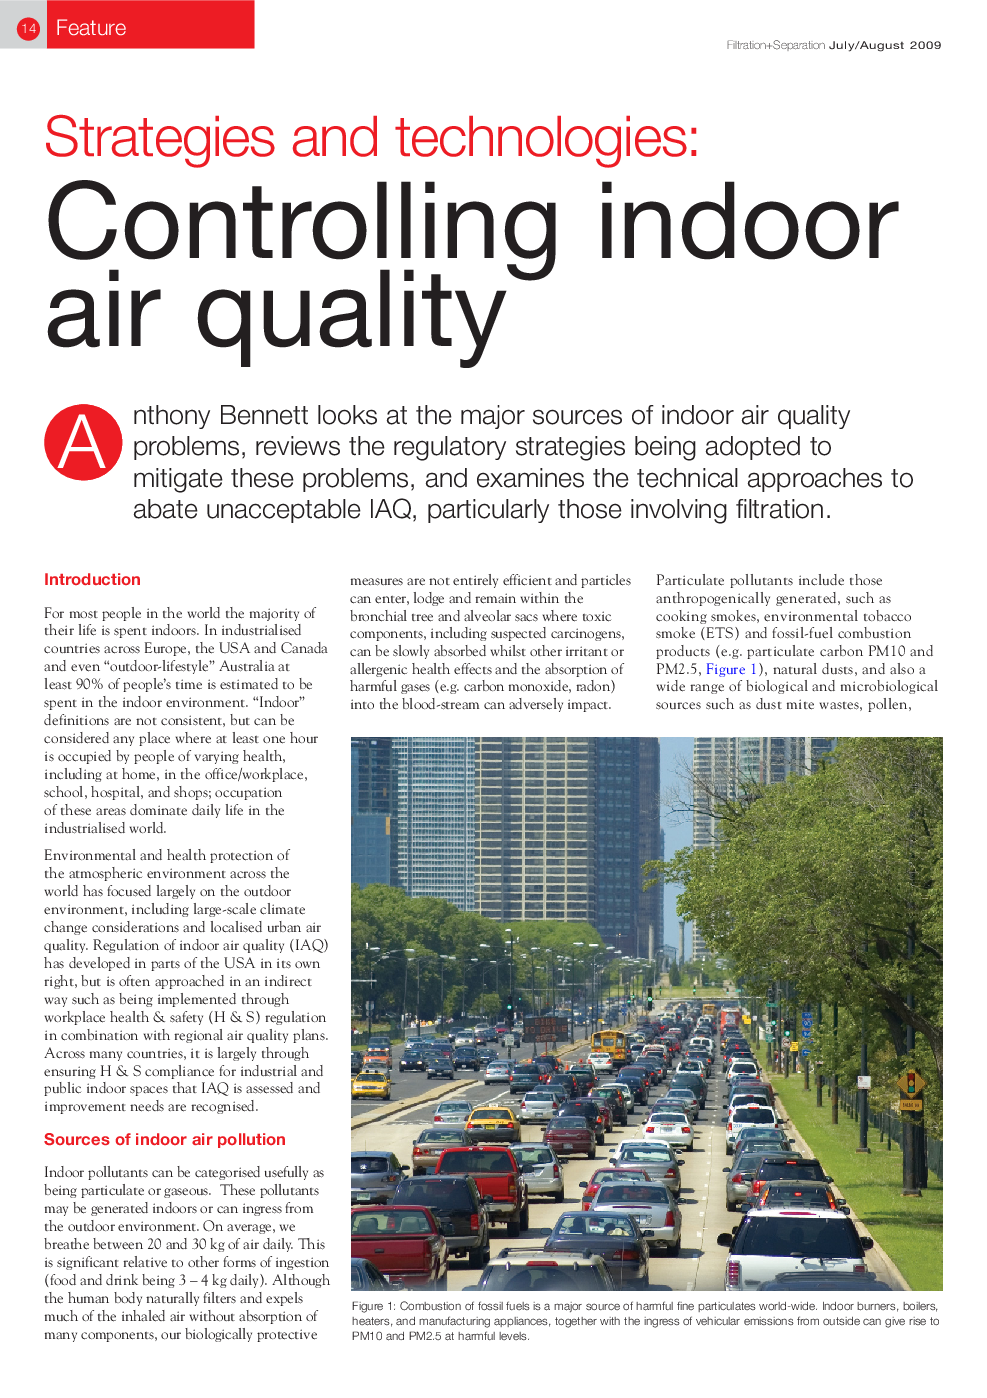 Strategies and technologies: Controlling indoor air quality